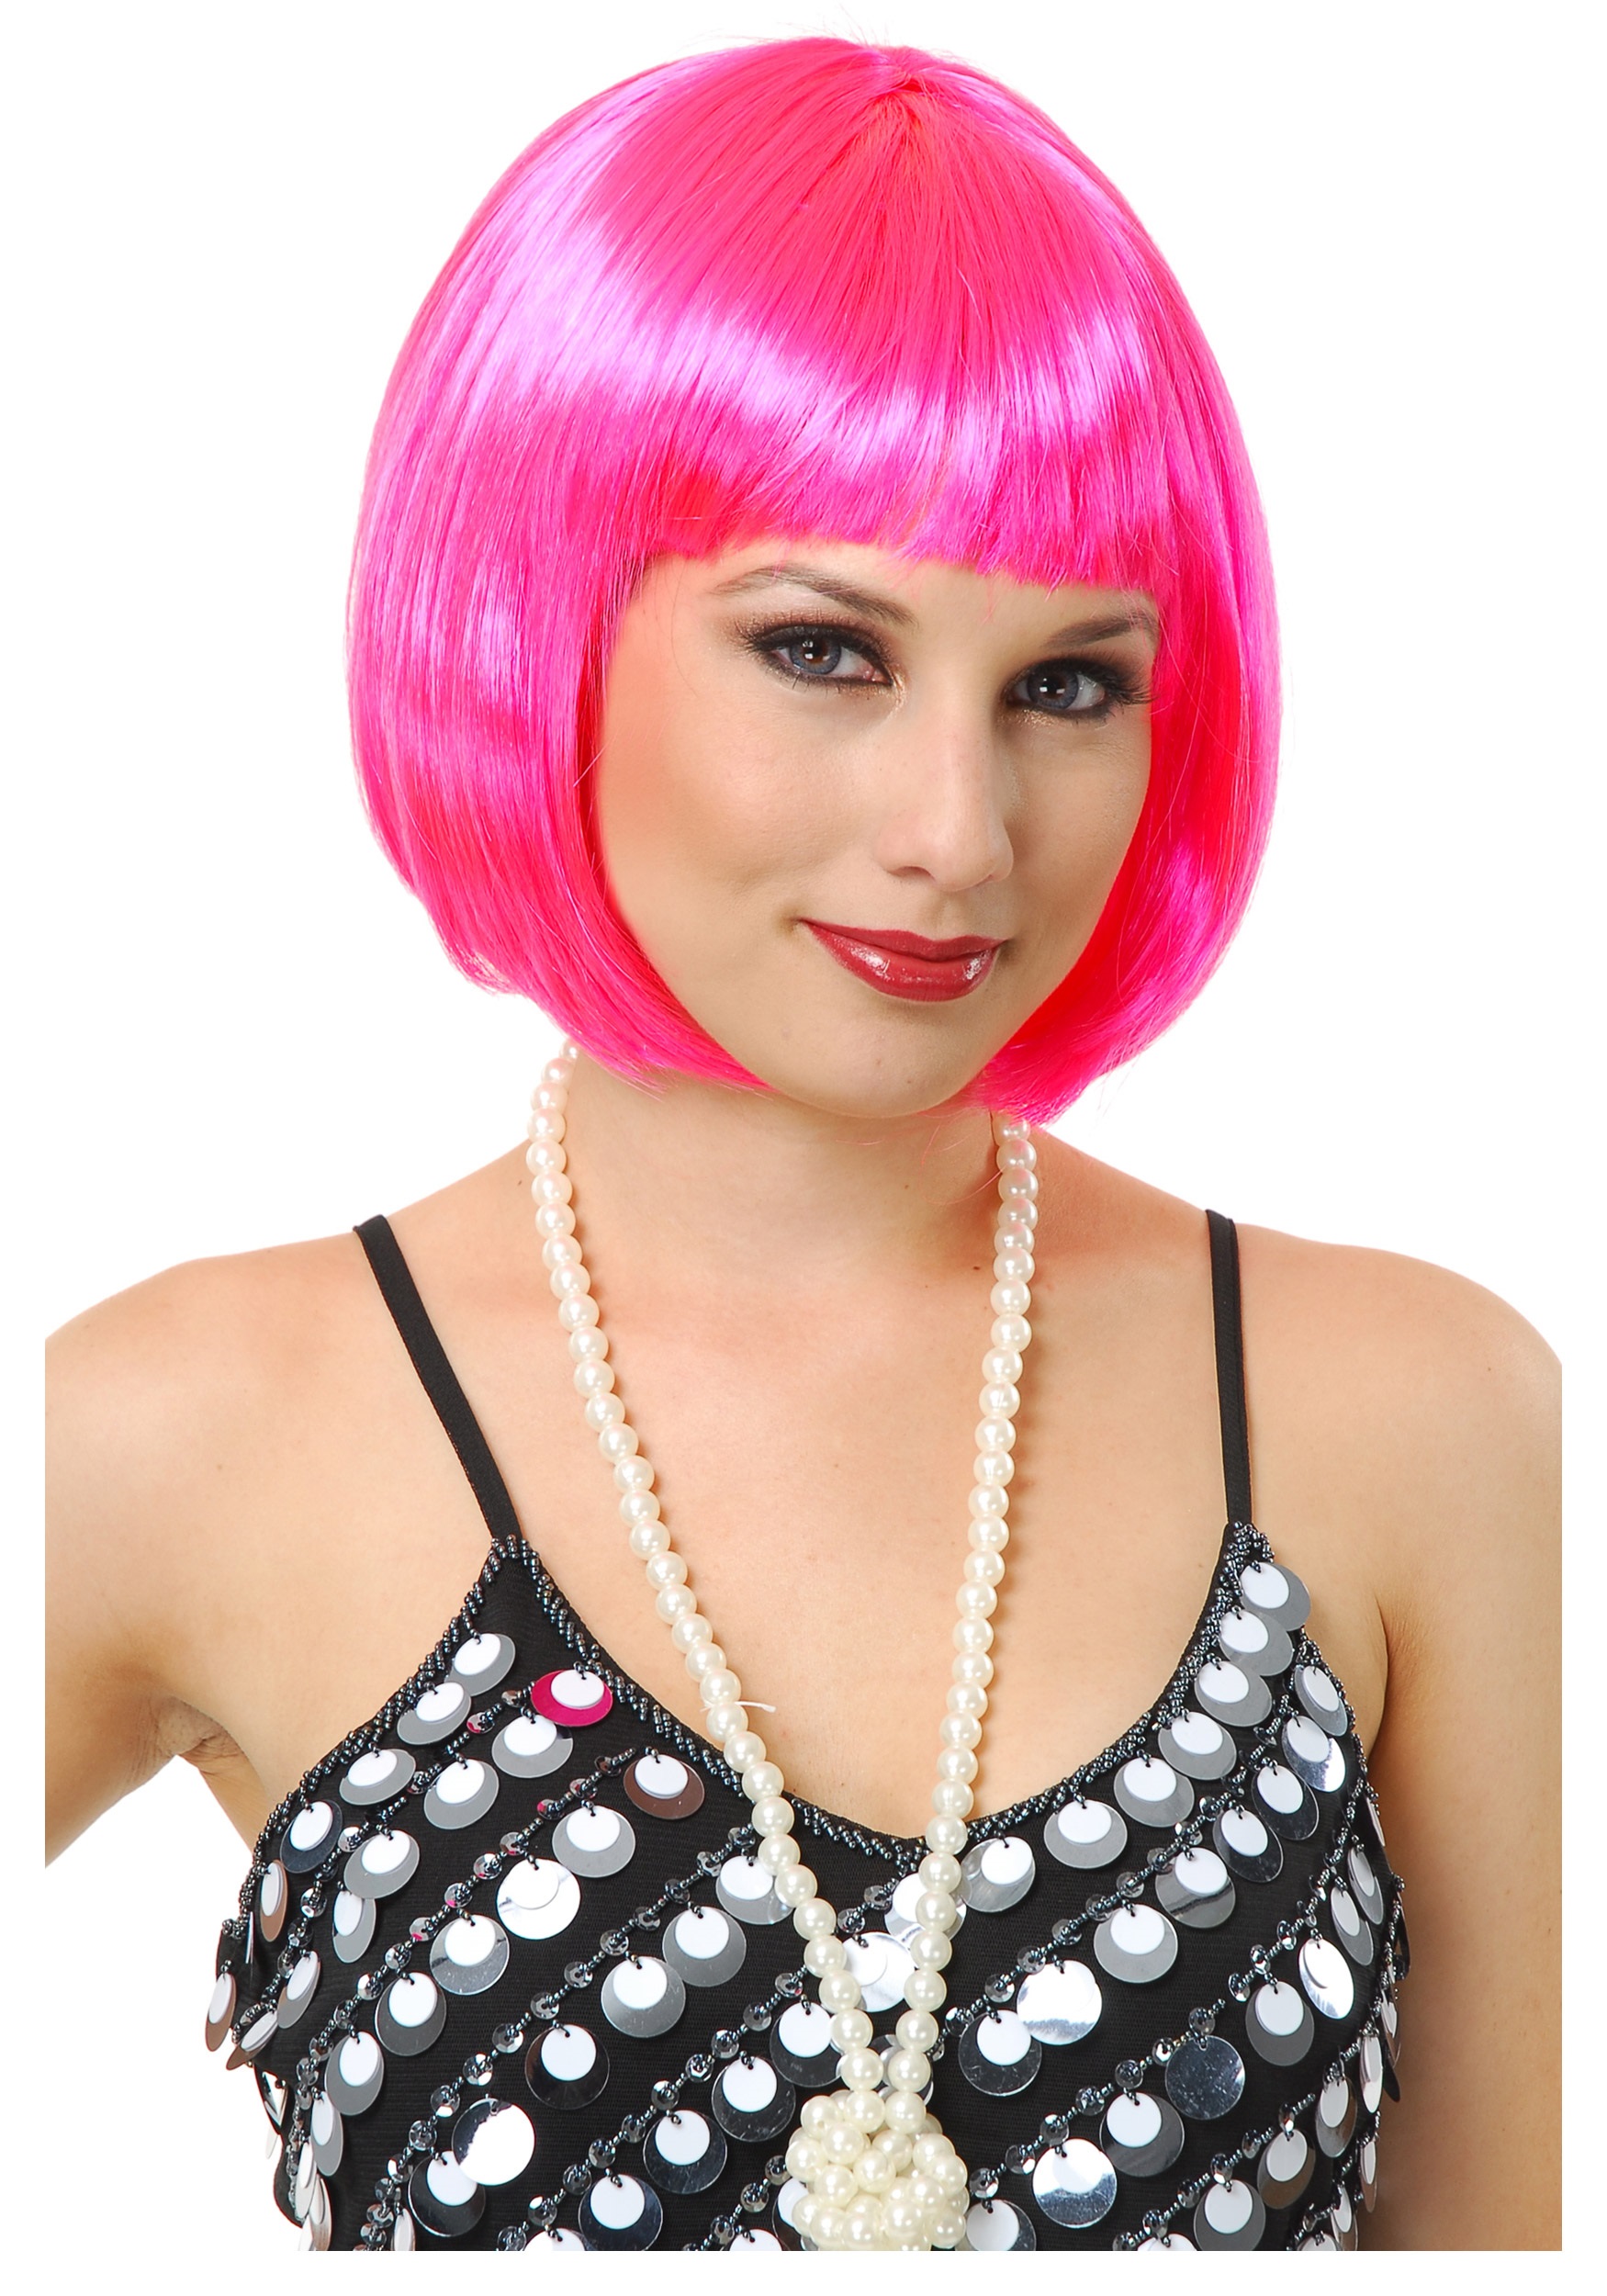 pink wigs for women